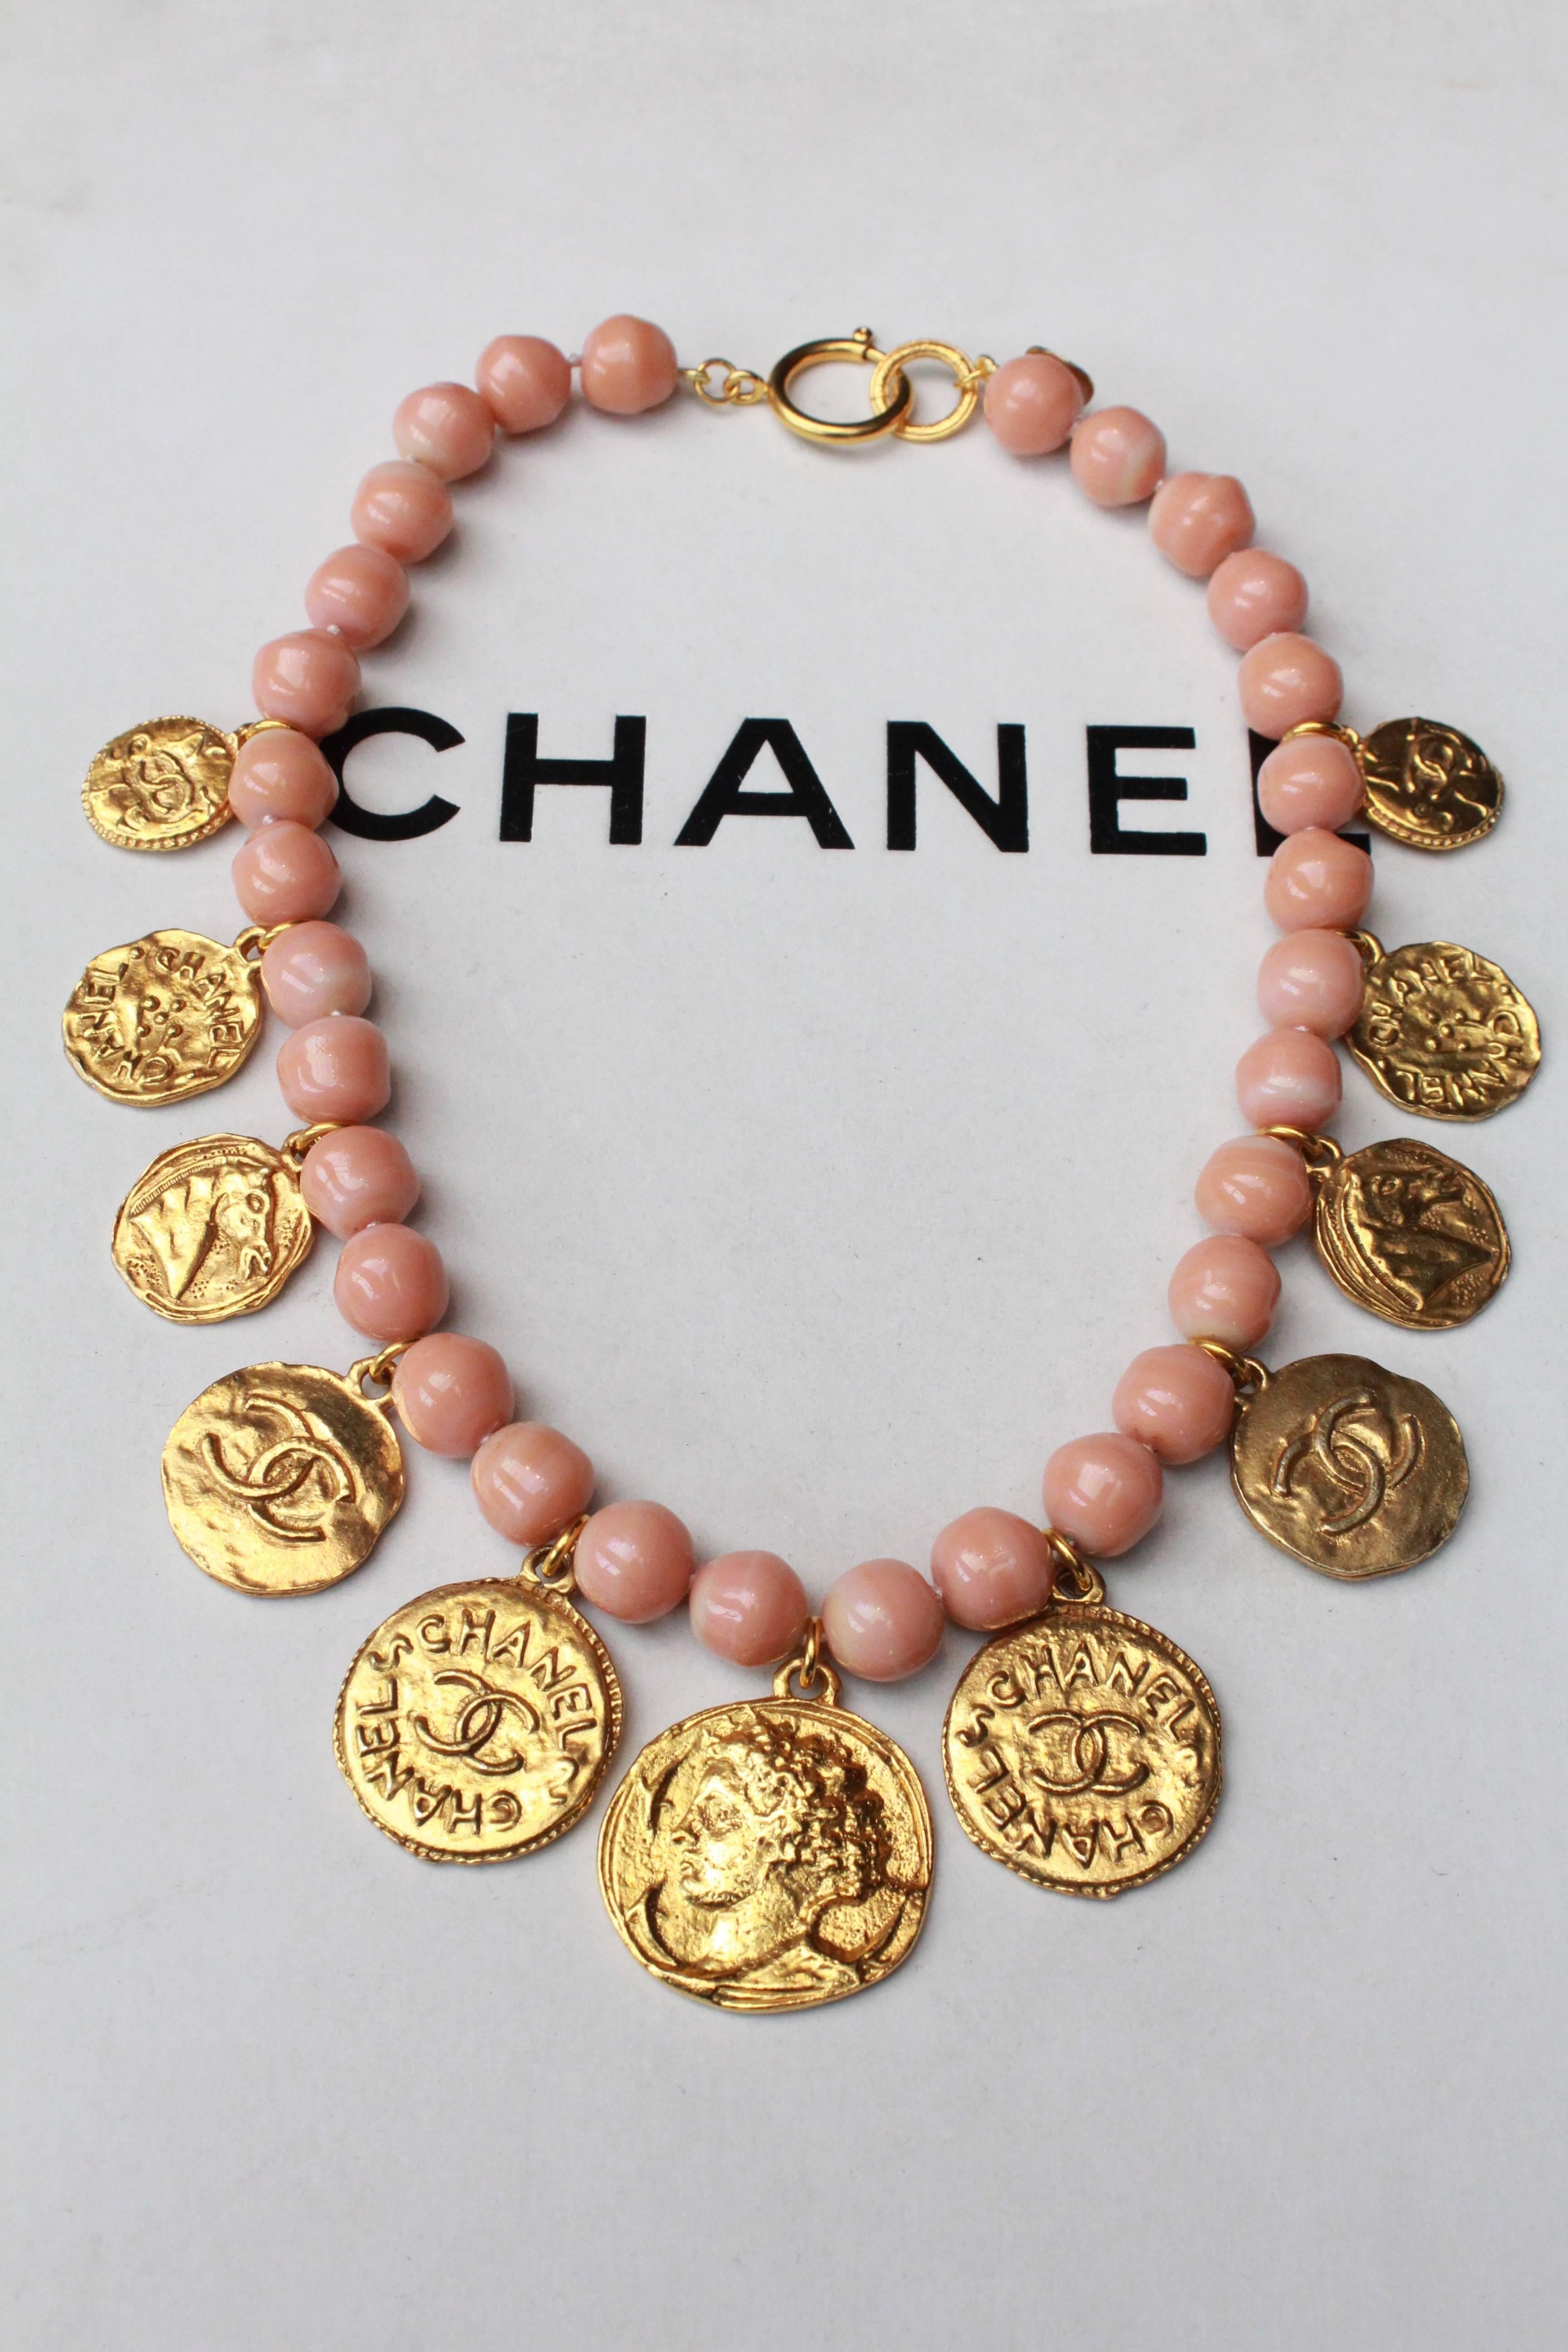 CHANEL (Made in France) Choker made of powder pink beads decorated all along with small stamped gilded metal medals representing coins.  Each medallion features a different motif, such as the brand logo, Gabrielle Chanel’s portrait or